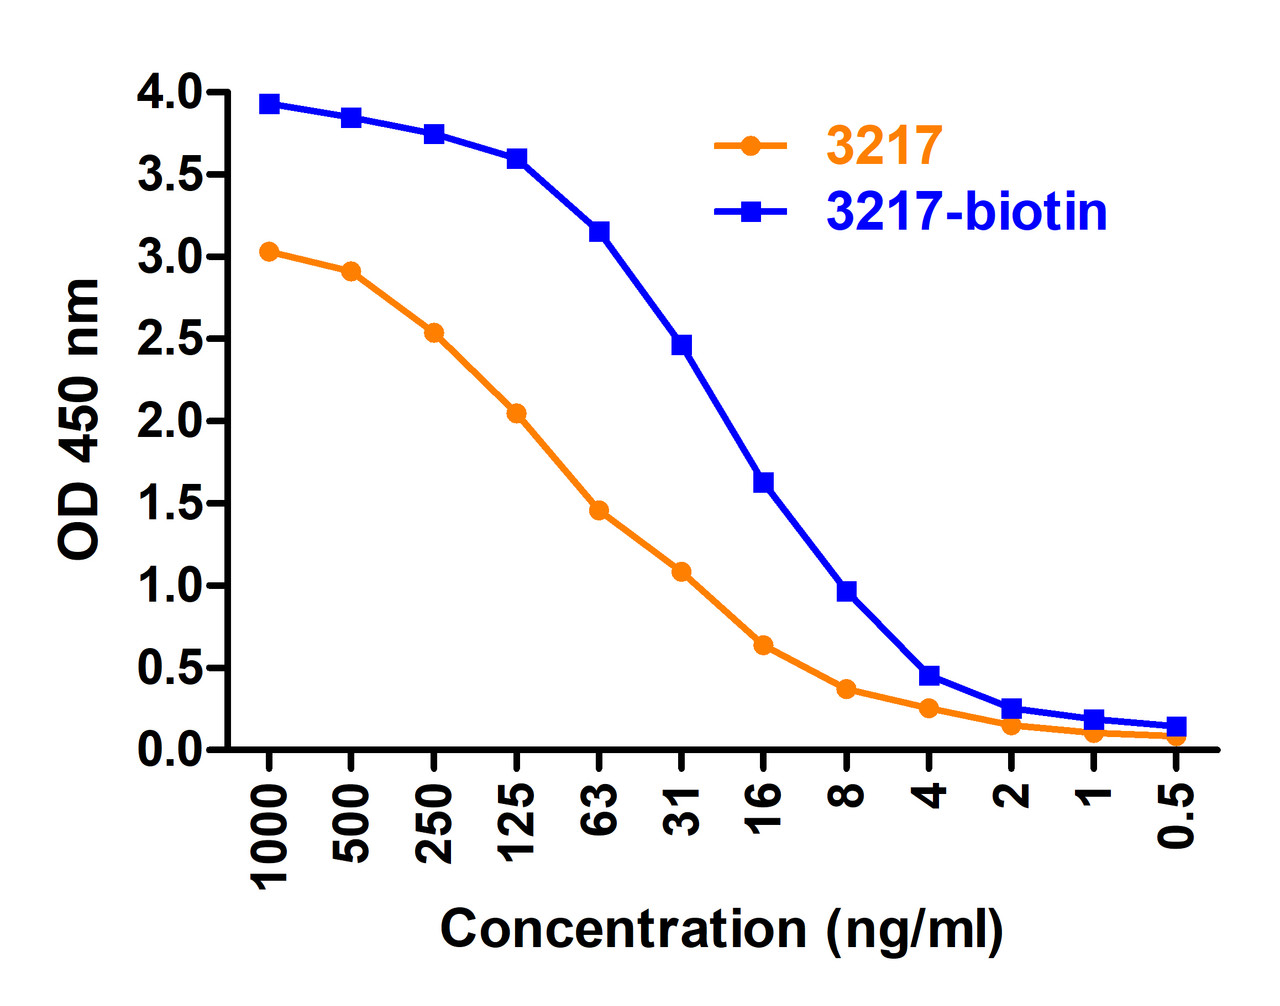 Figure 1 ELISA Validation 
Coating Antigen: immunogen peptide, 3217P, 10 &#956;g/mL, incubate at 4 &#730;C overnight.
Detection Antibodies: SARS-CoV-2 Spike antibody, 3217-biotin or 3217, dilution: 0.5-1000 ng/mL, incubate at RT for 1 hr. 3217-biotin was detected by HRP-conjugated streptavidin at 1:5, 000 and 3217 was detected by anti-rabbit HRP conjugated secondary antibodies at 1:10, 000, incubate at RT for 1 hr.